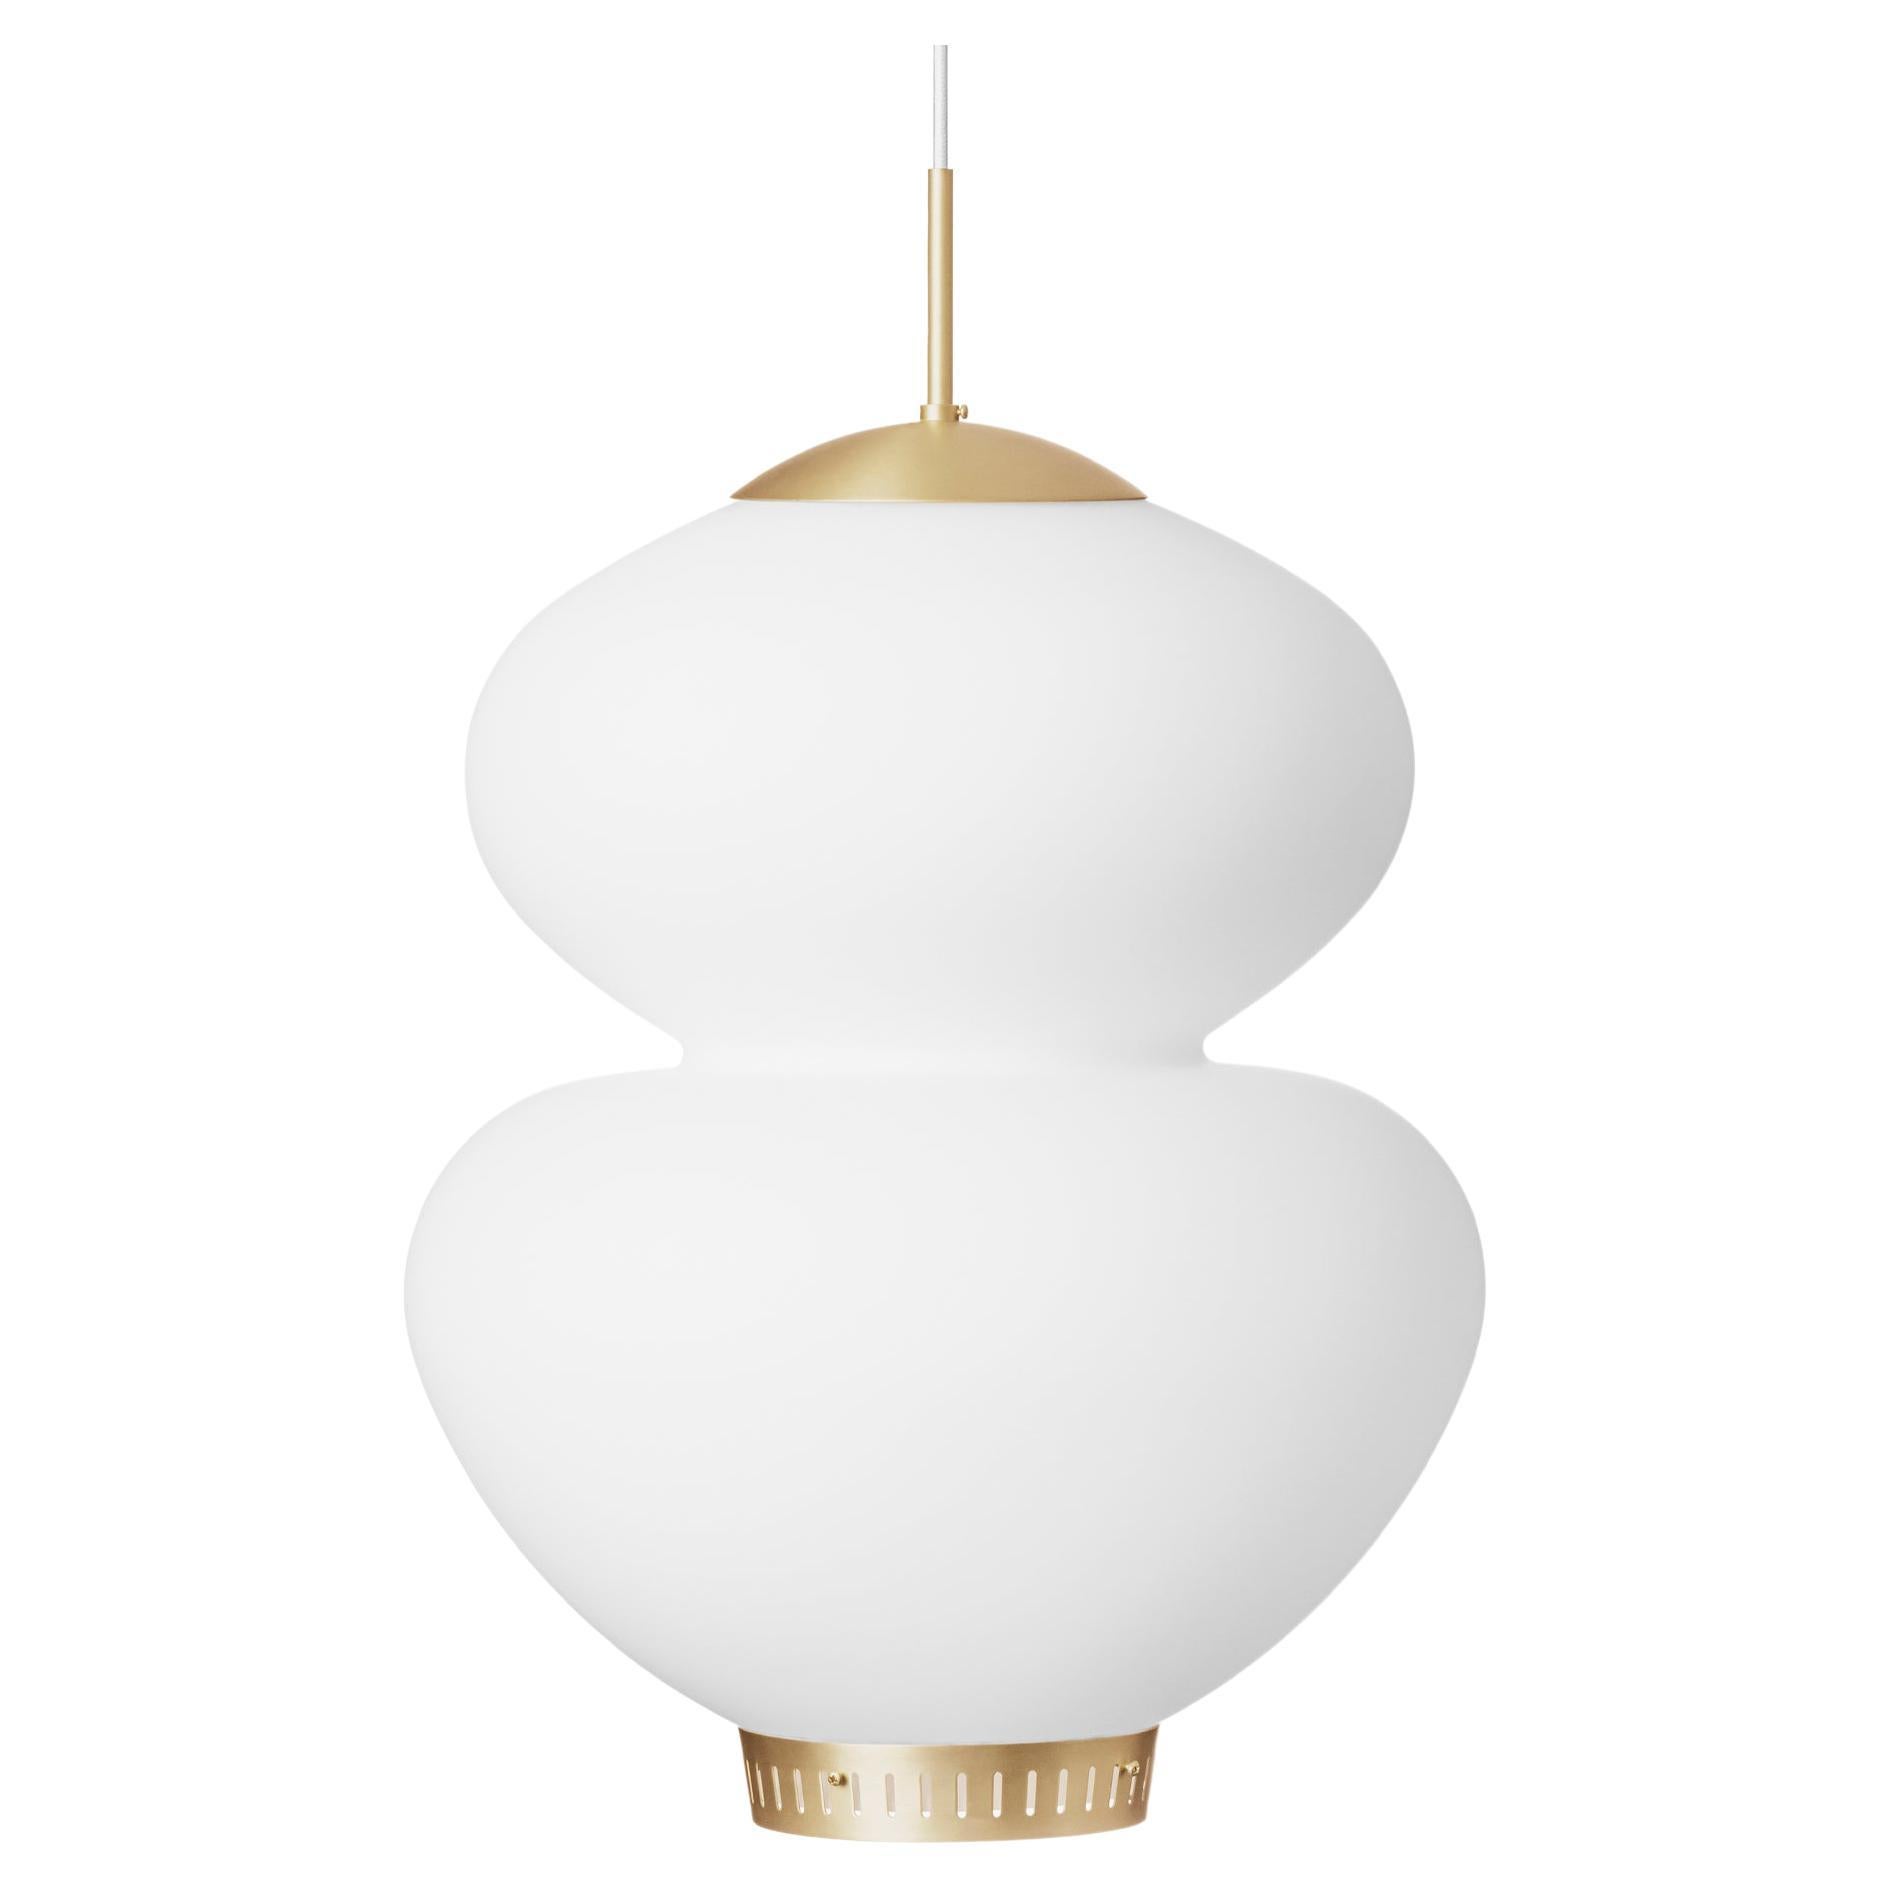 'Peanut 250' Pendant Lamp by Bent Karlby for Lyfa 'New Edition'